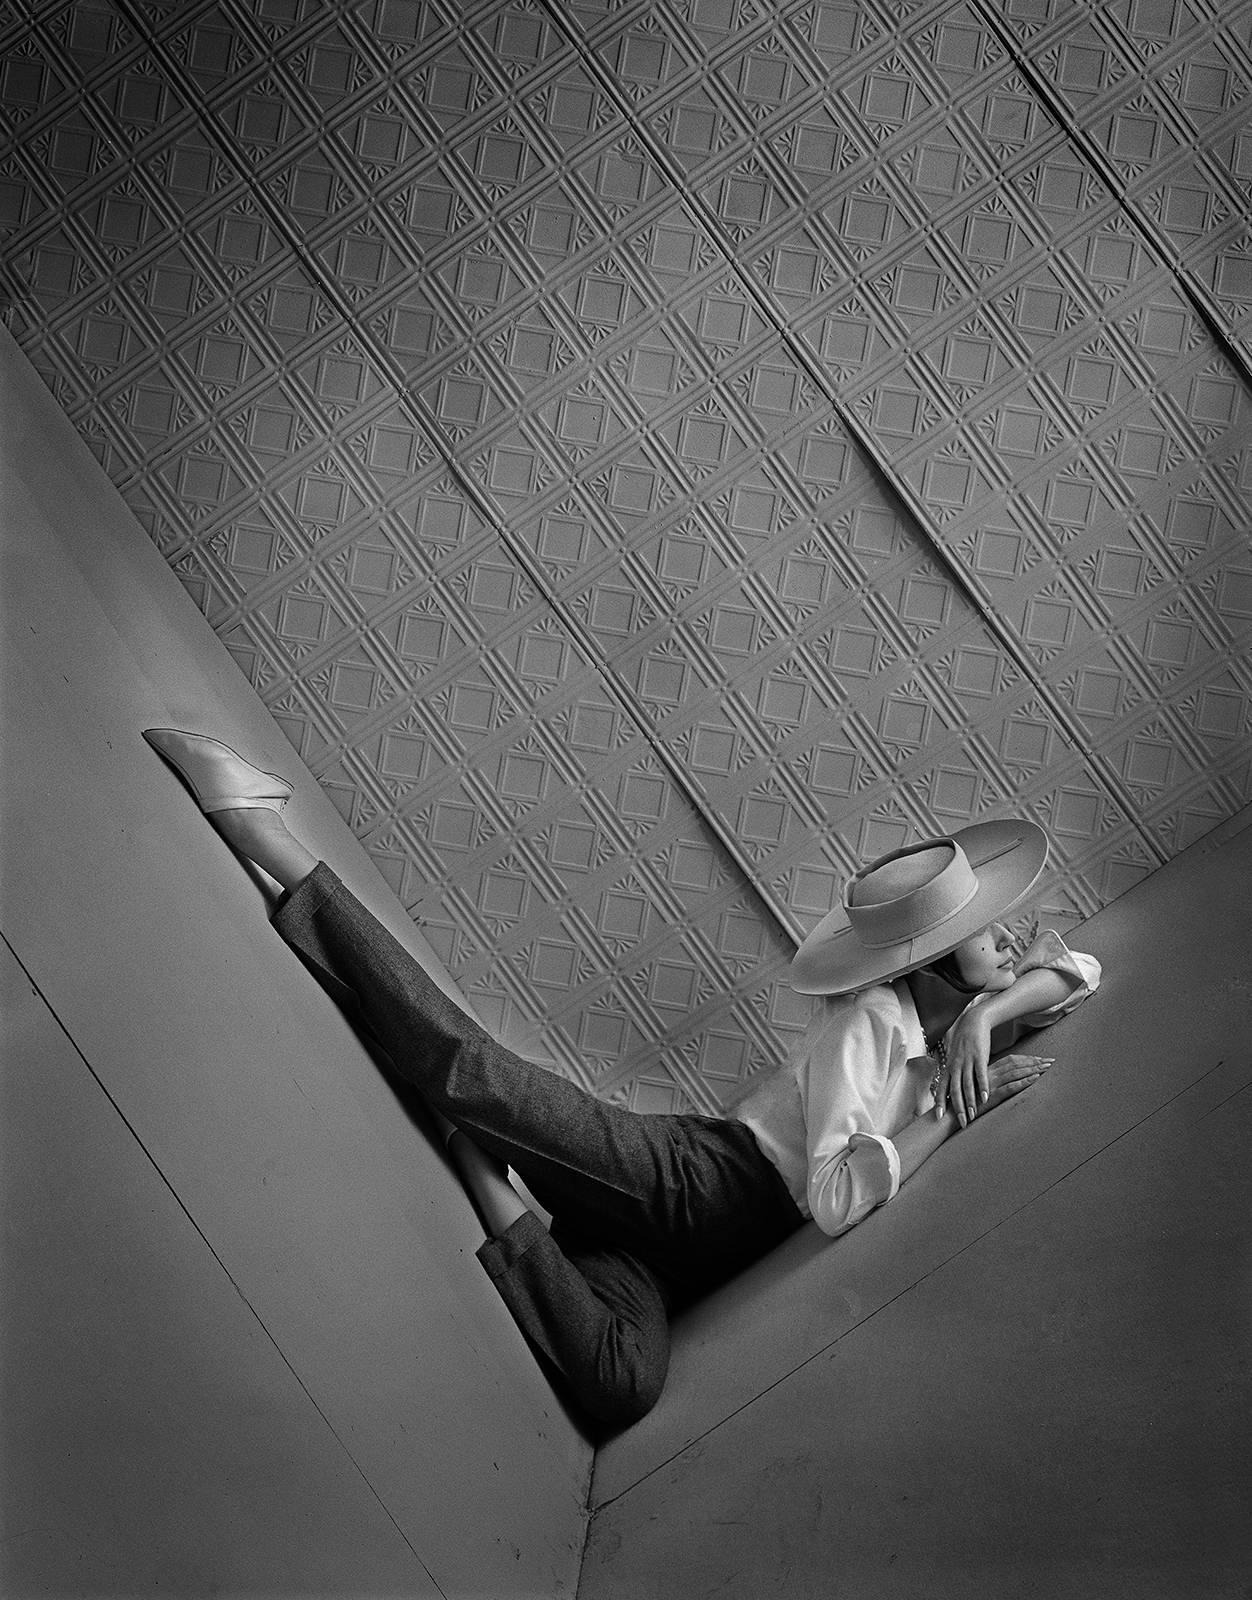 Melvin Sokolsky Black and White Photograph - Weightless